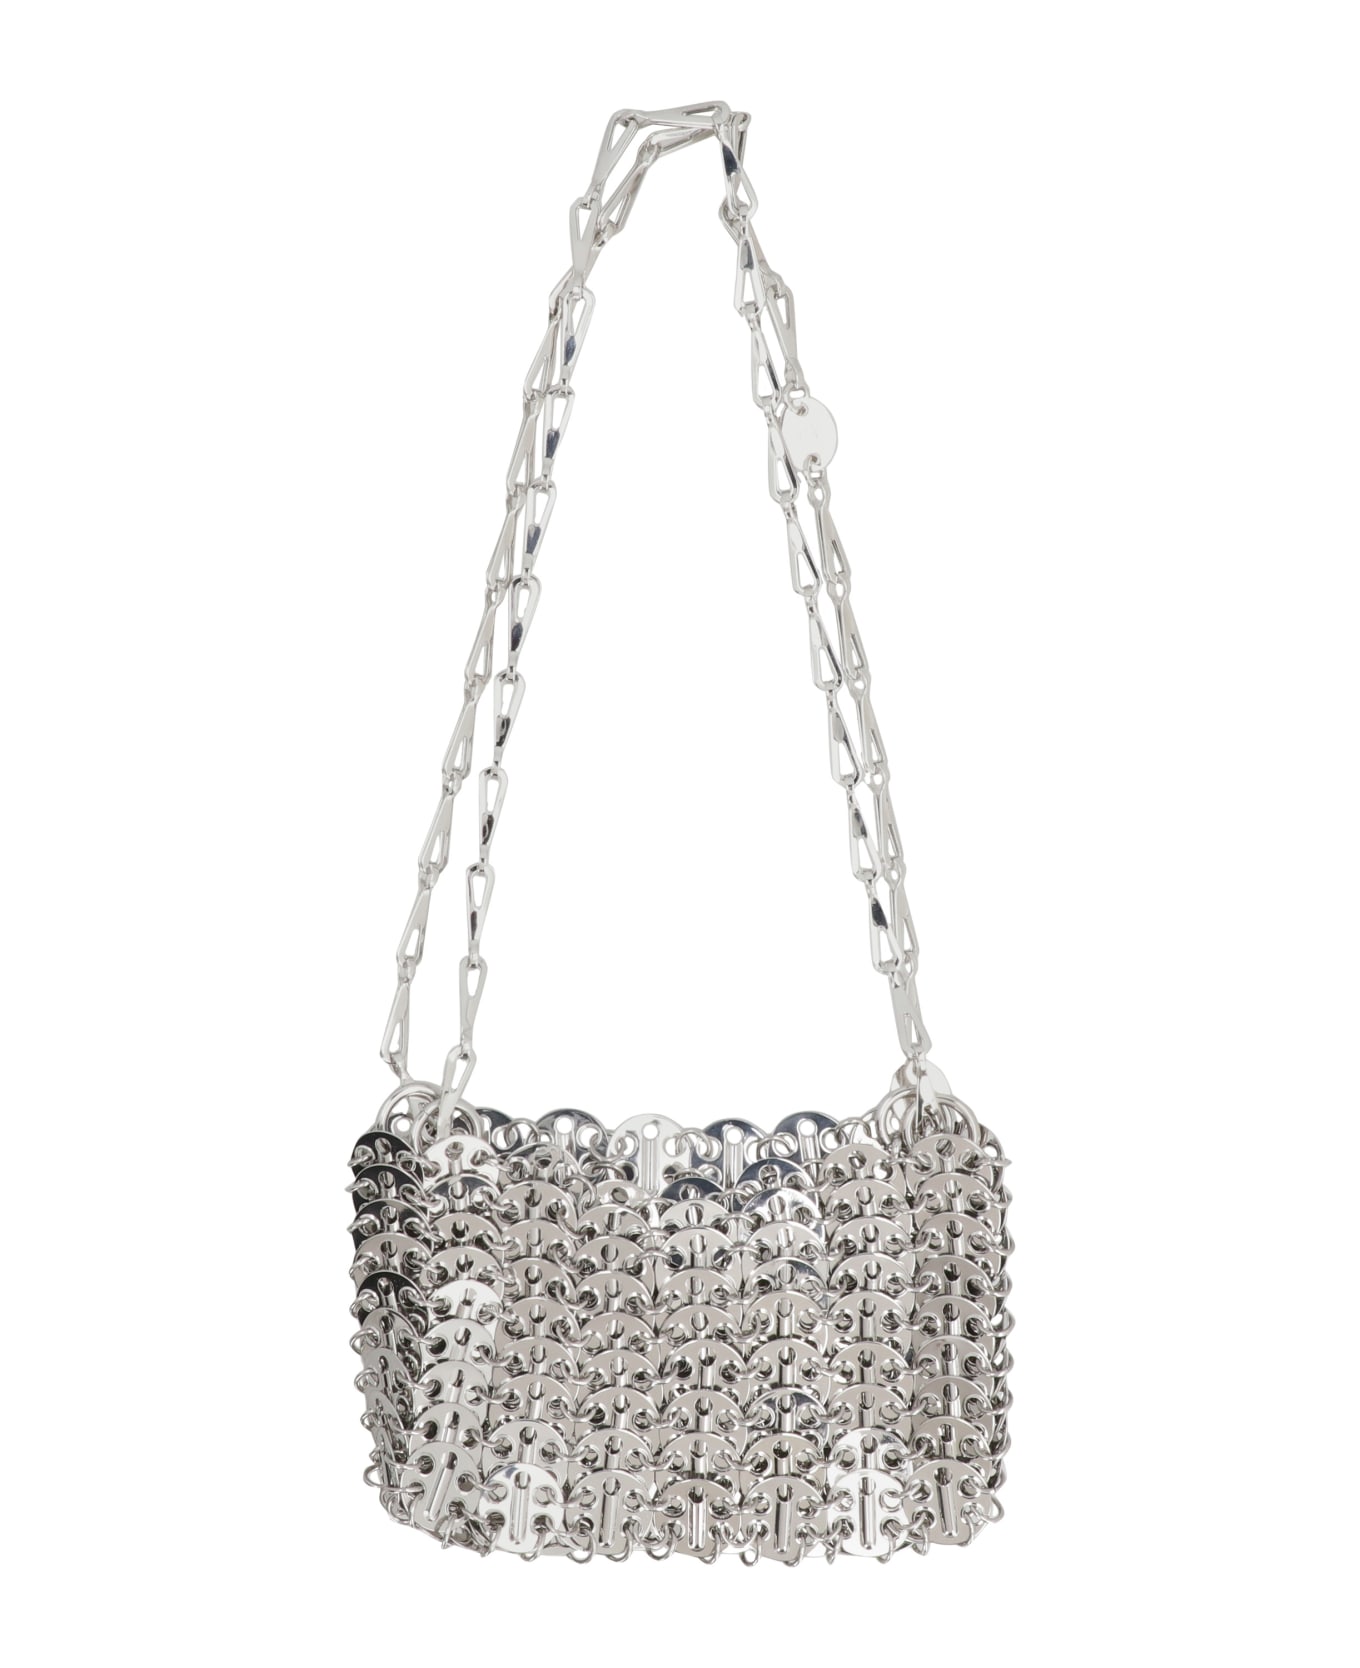 Paco Rabanne Silver Iconic 1969 Nano Bag - Silver クラッチバッグ